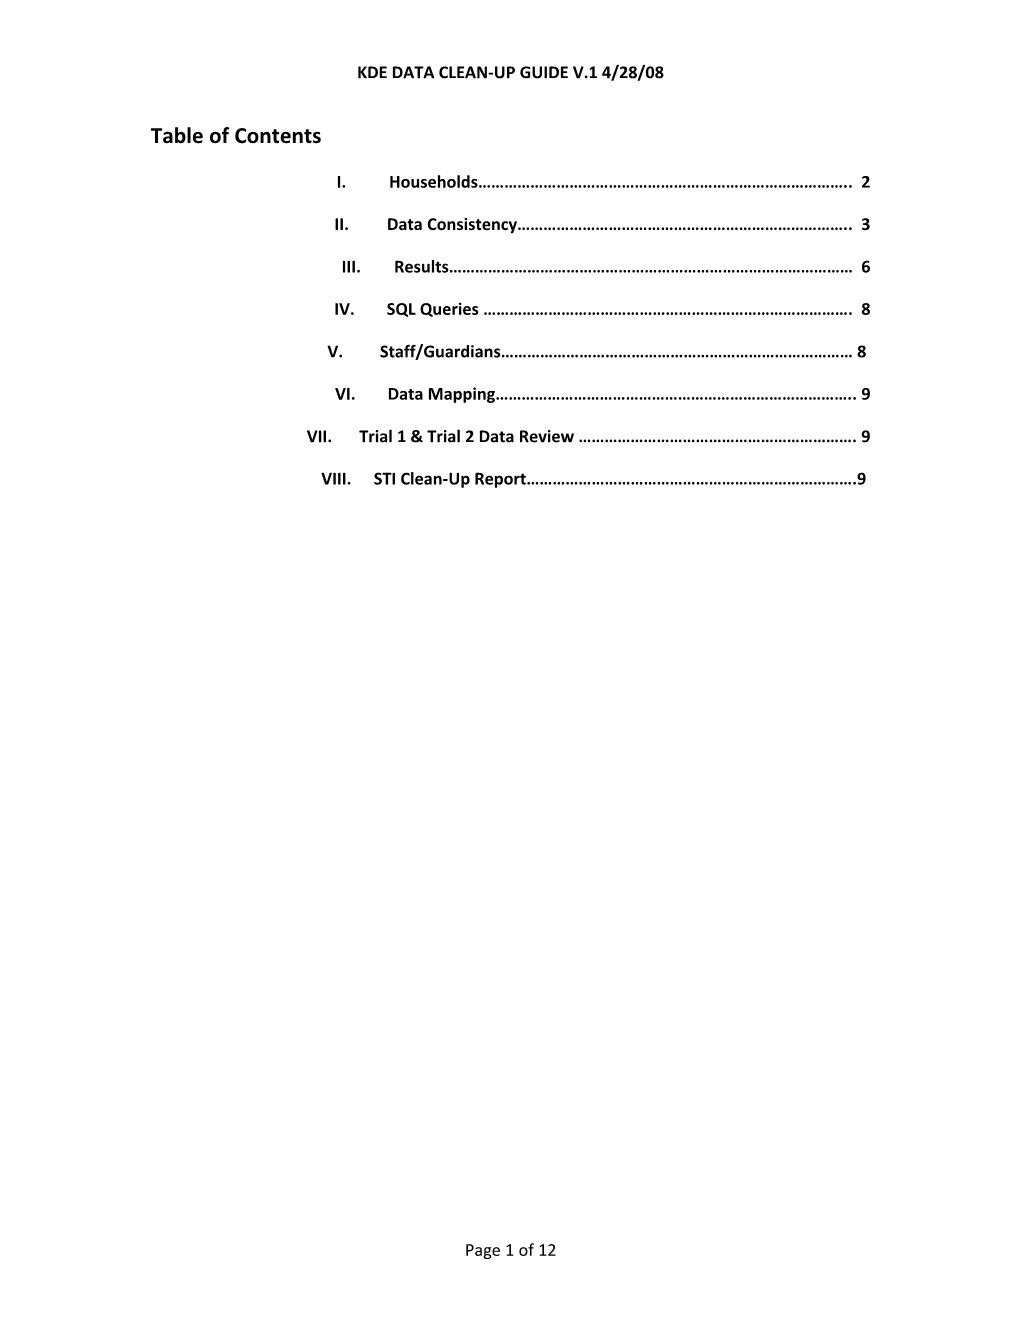 Table of Contents s180